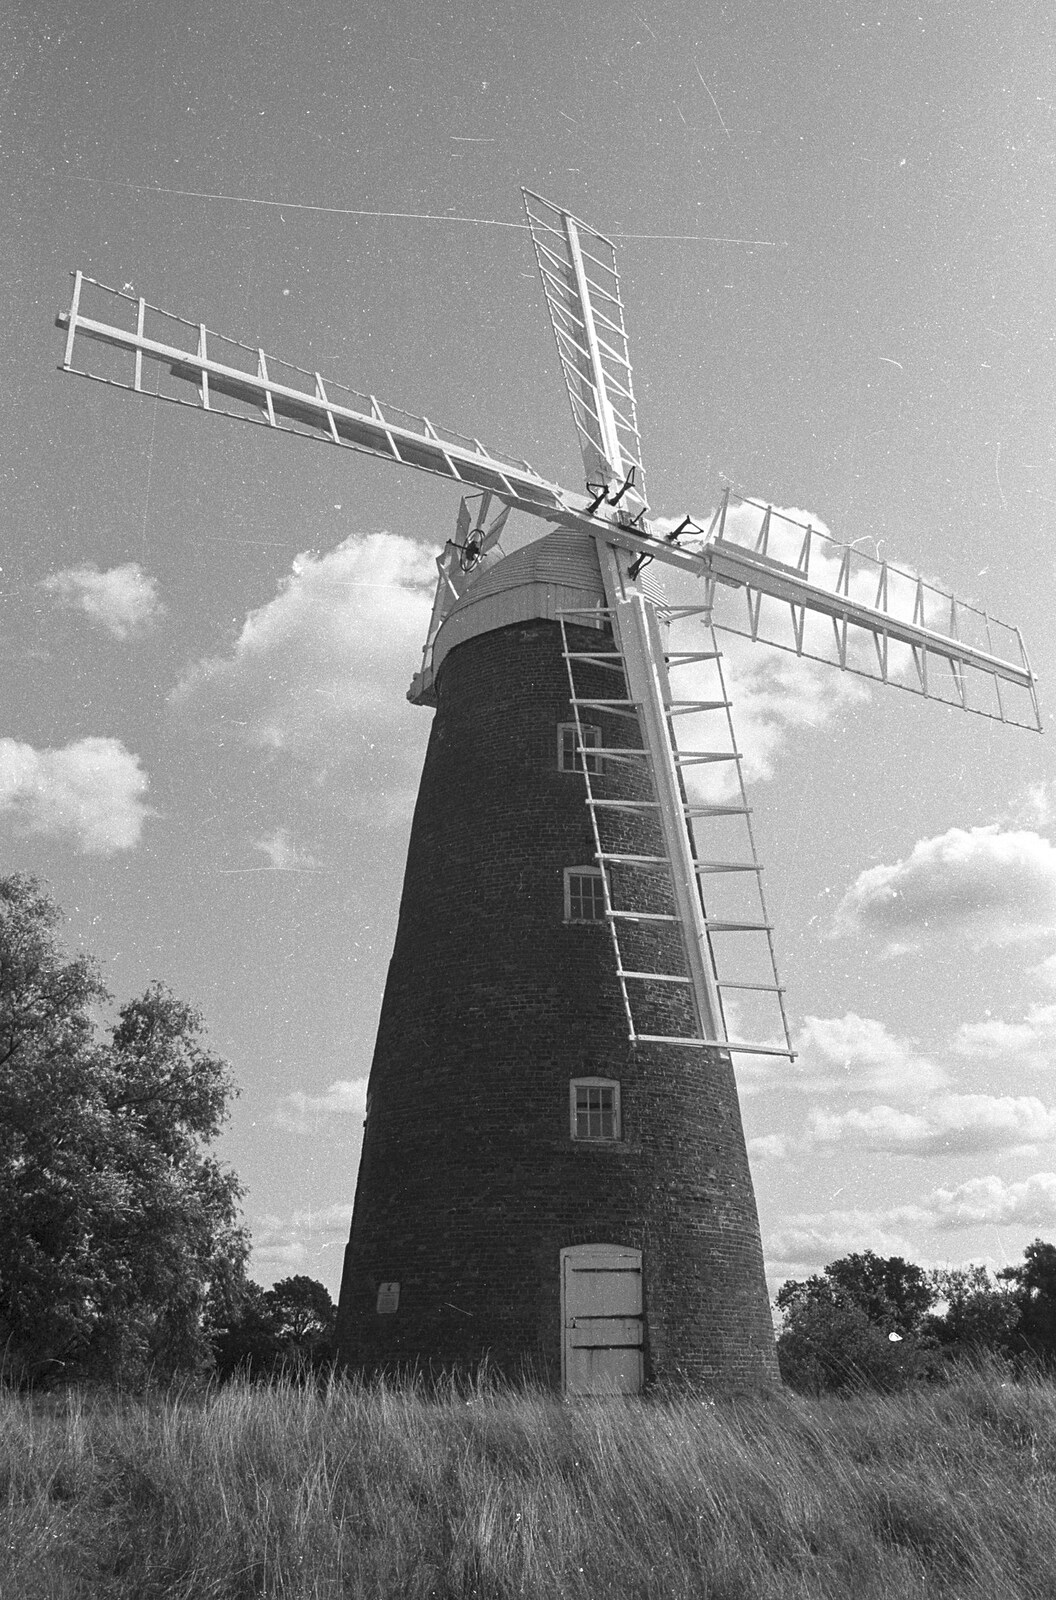 A Black and White Life in Concrete, Stuston, Suffolk - 3rd September 1992: Billingford windmill again